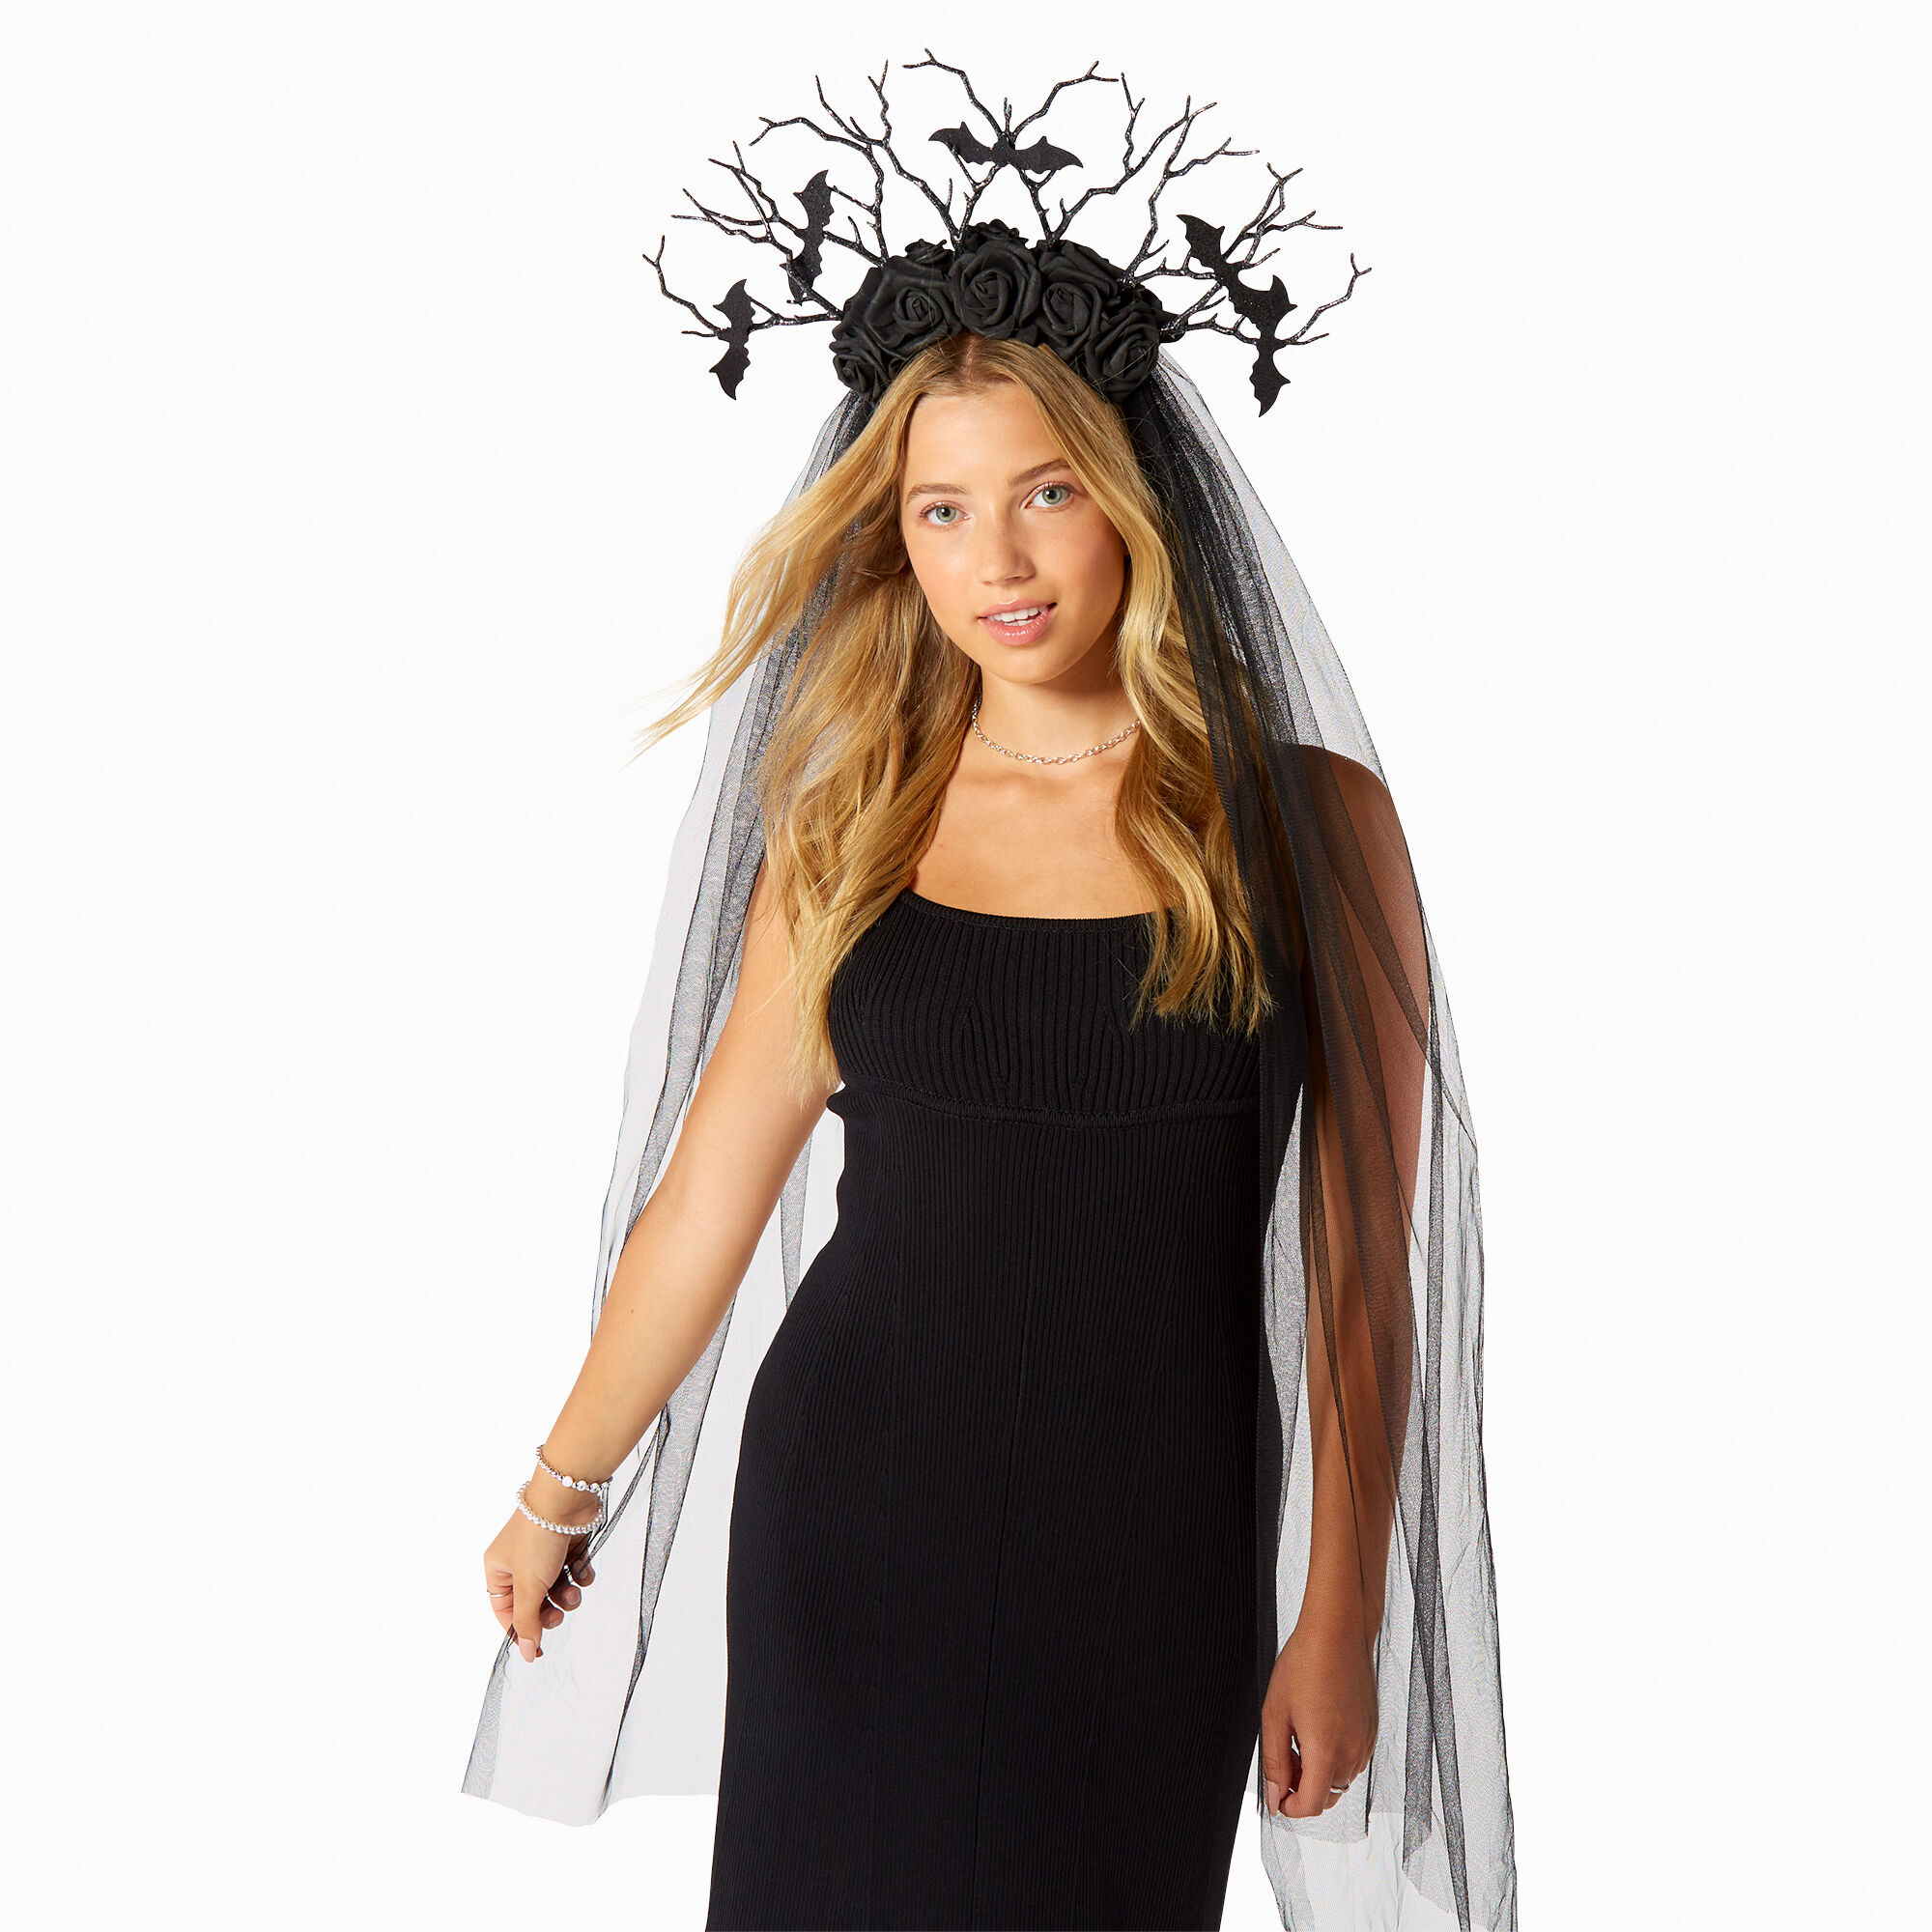 View Claires Bats Branches Roses Headband With Veil Black information